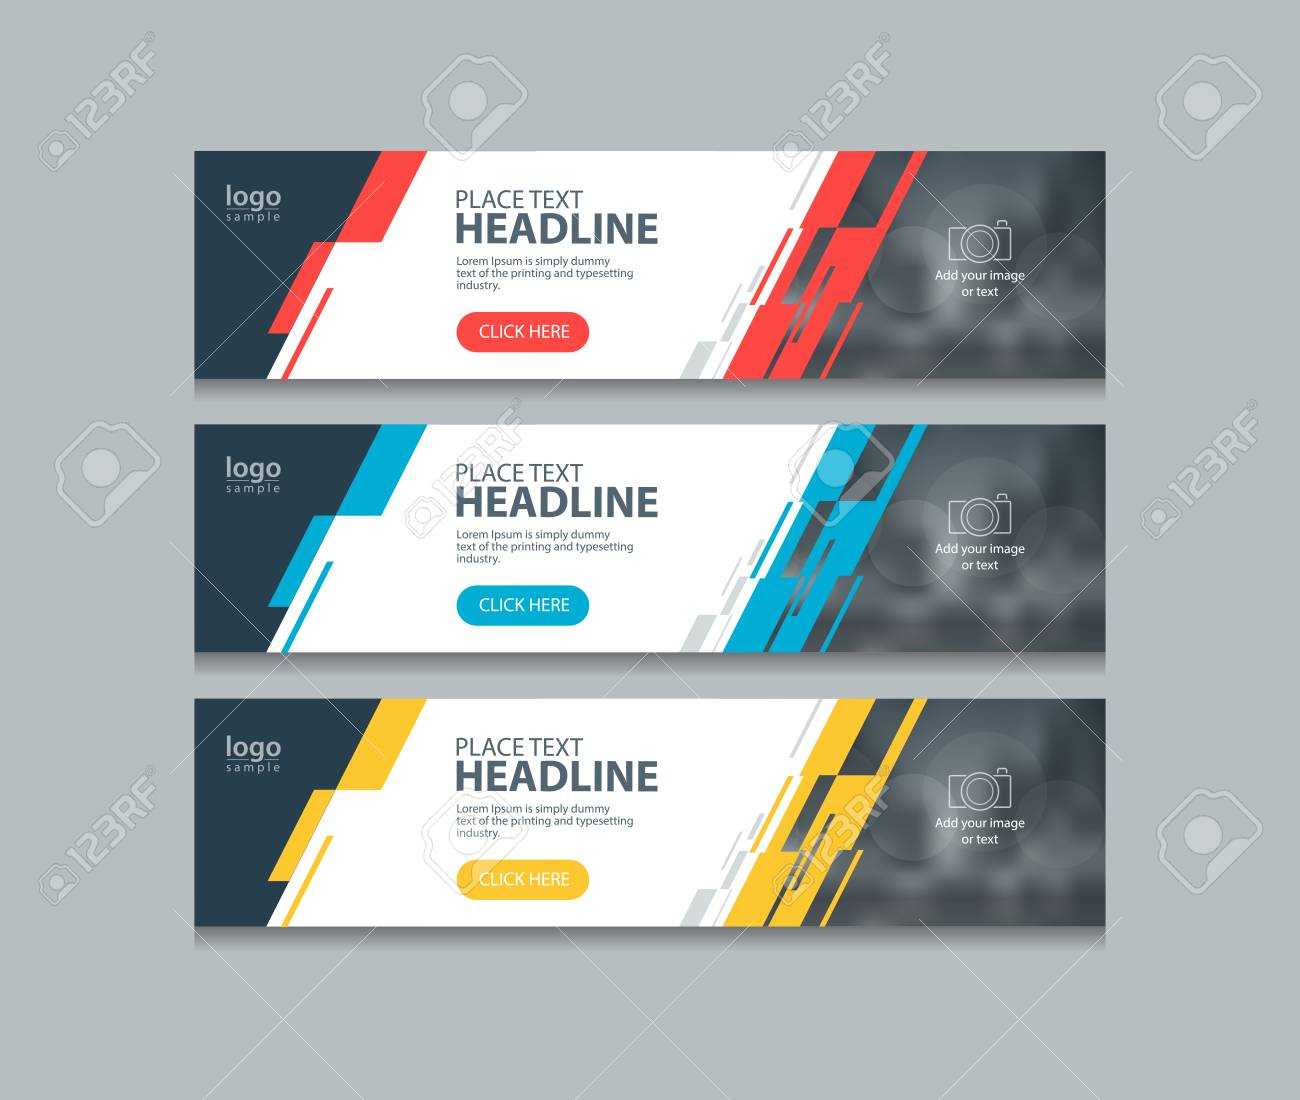 Abstract Horizontal Web Banner Design Template Backgrounds Throughout Website Banner Design Templates